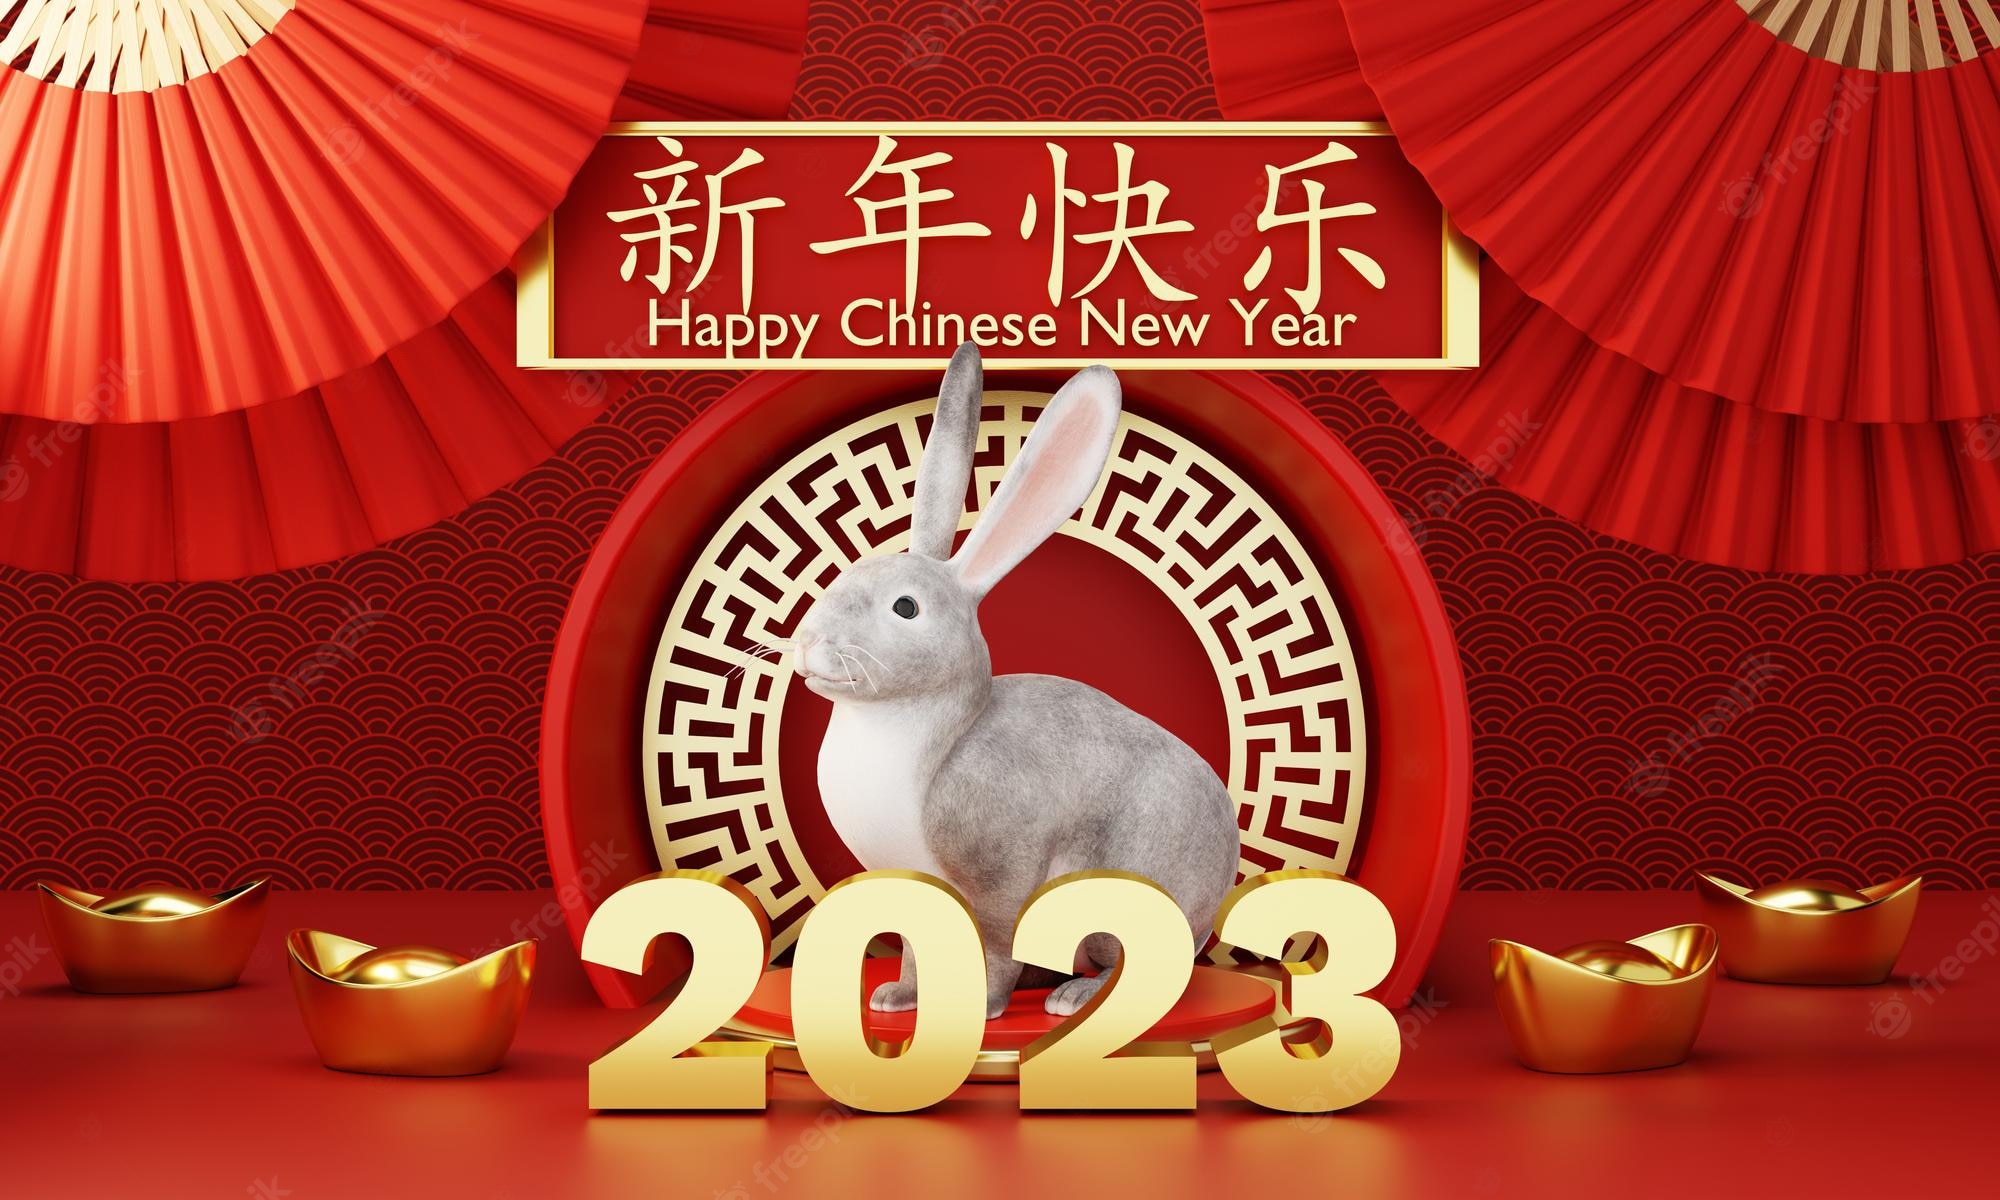 Premium Photo. Chinese new year 2023 year of rabbit or bunny on red chinese pattern with hand fan background